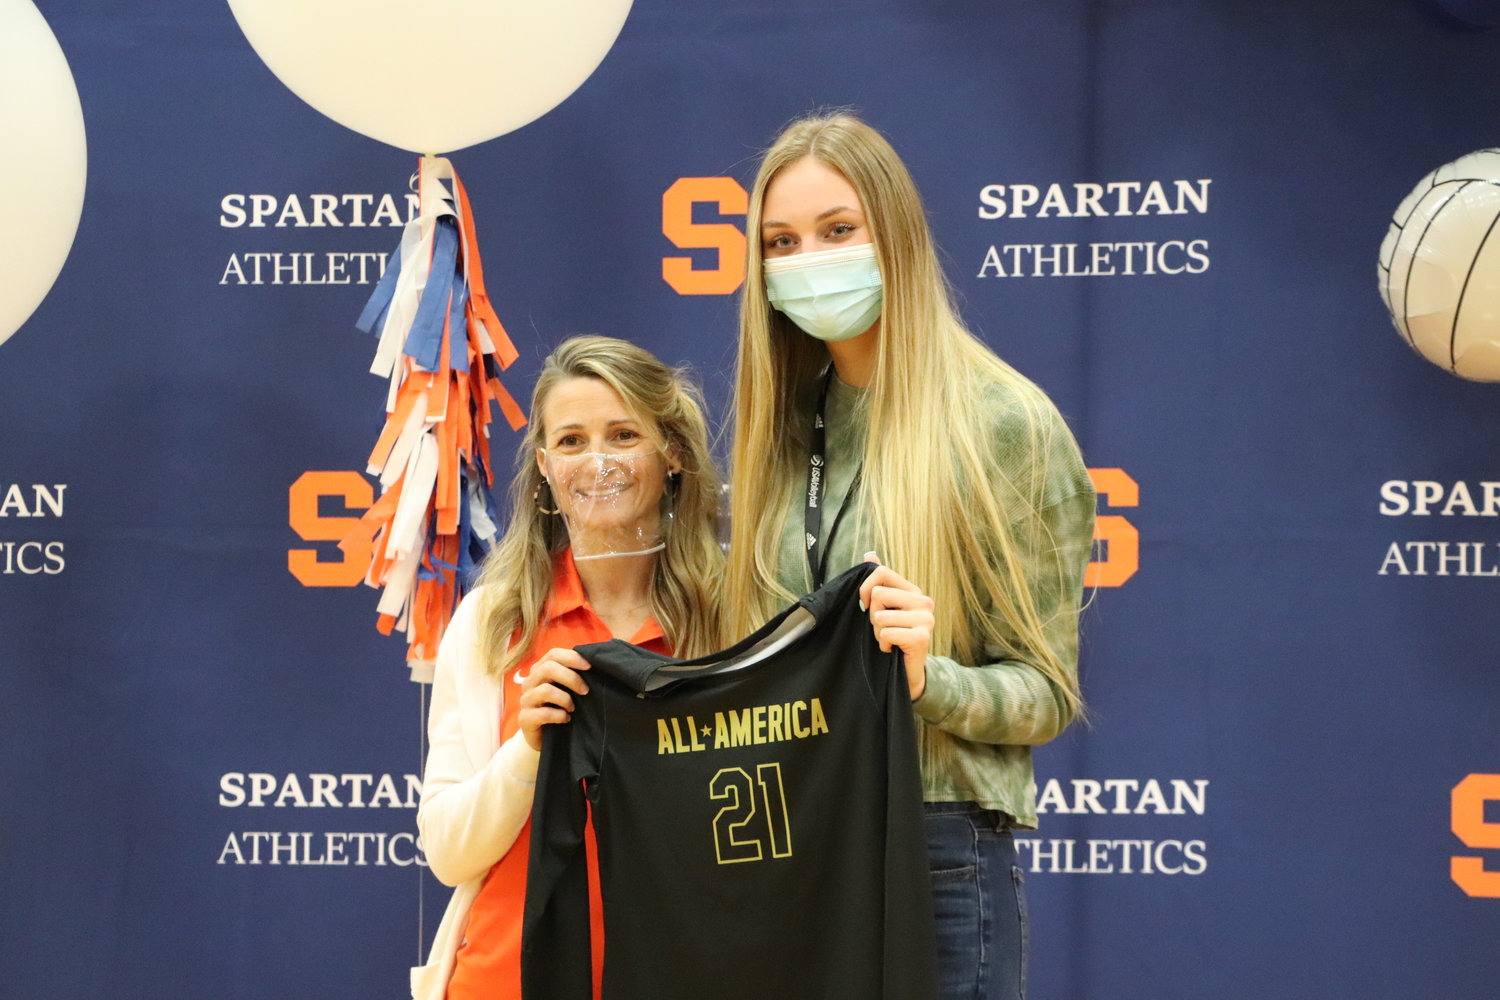 Seven Lakes senior outside hitter Ally Batenhorst and Spartans coach Amy Cataline pose for a photo after Batenhorst was awarded her Under Armour All-American jersey on Wednesday morning after being selected as one of 11 players to the first team.